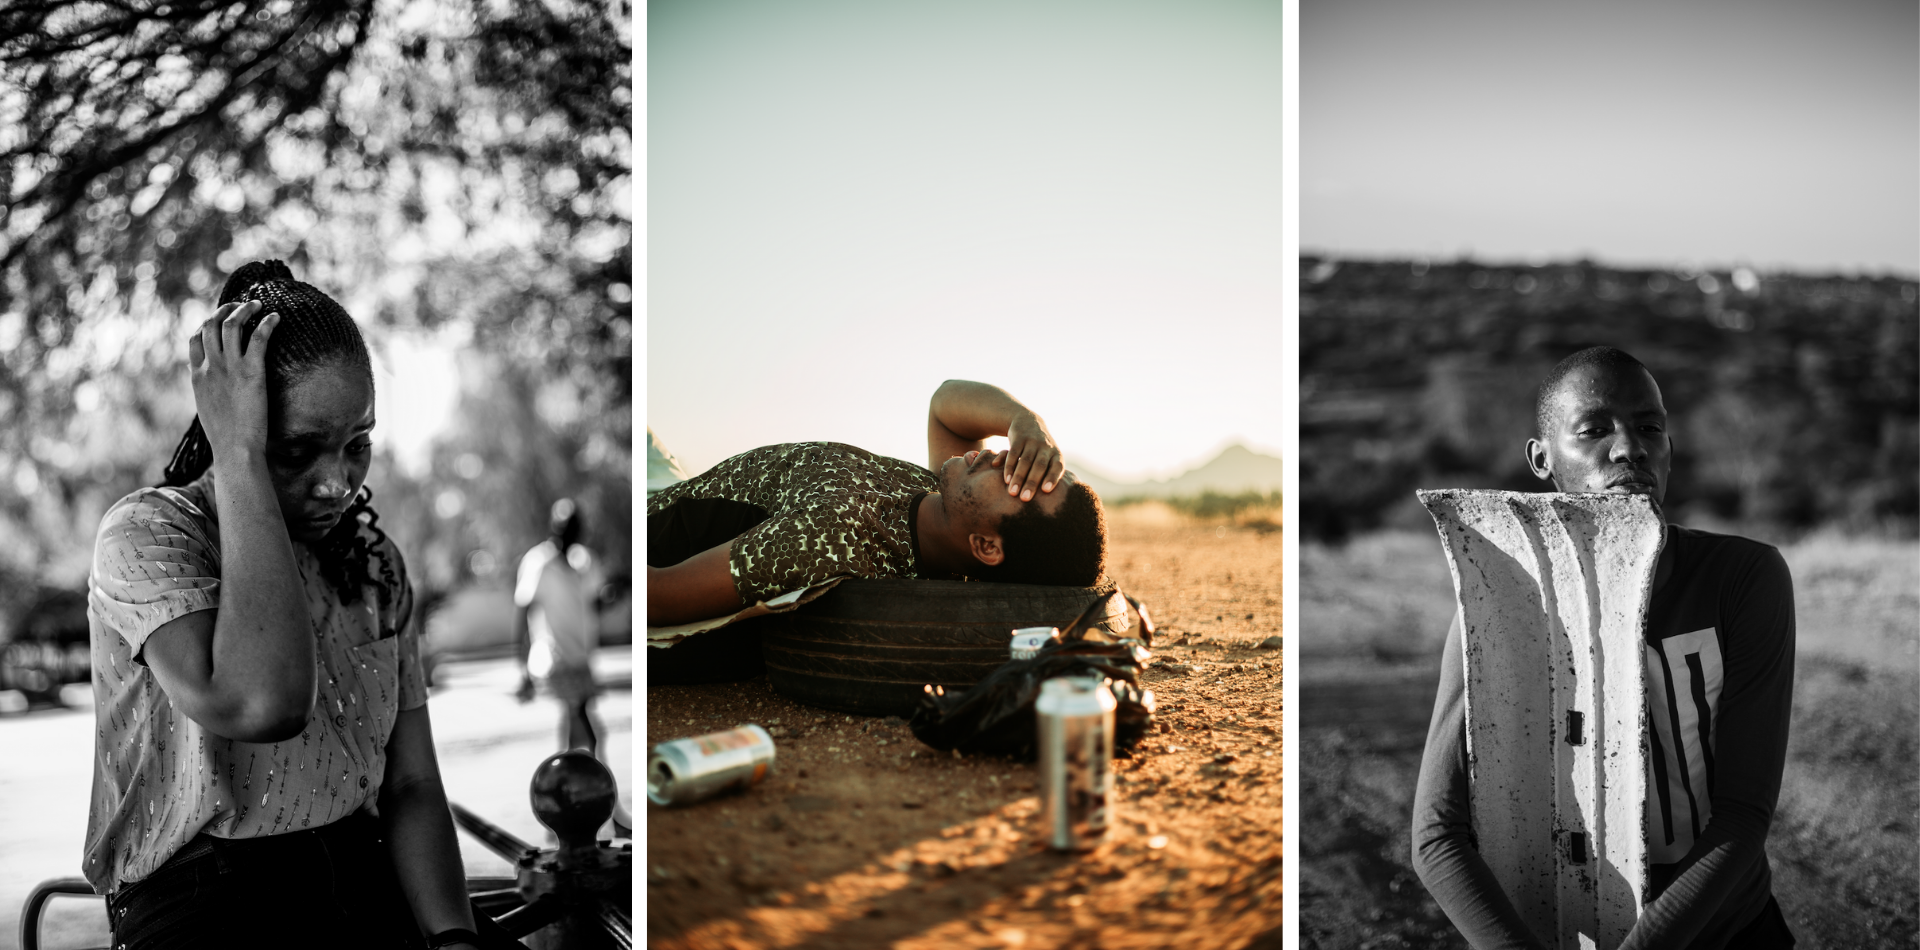 Triptych of images: young woman alone in a park; young man lying on a tyre on the sand, next to an empty can; young man stands leaning on a pillar gazing off camera